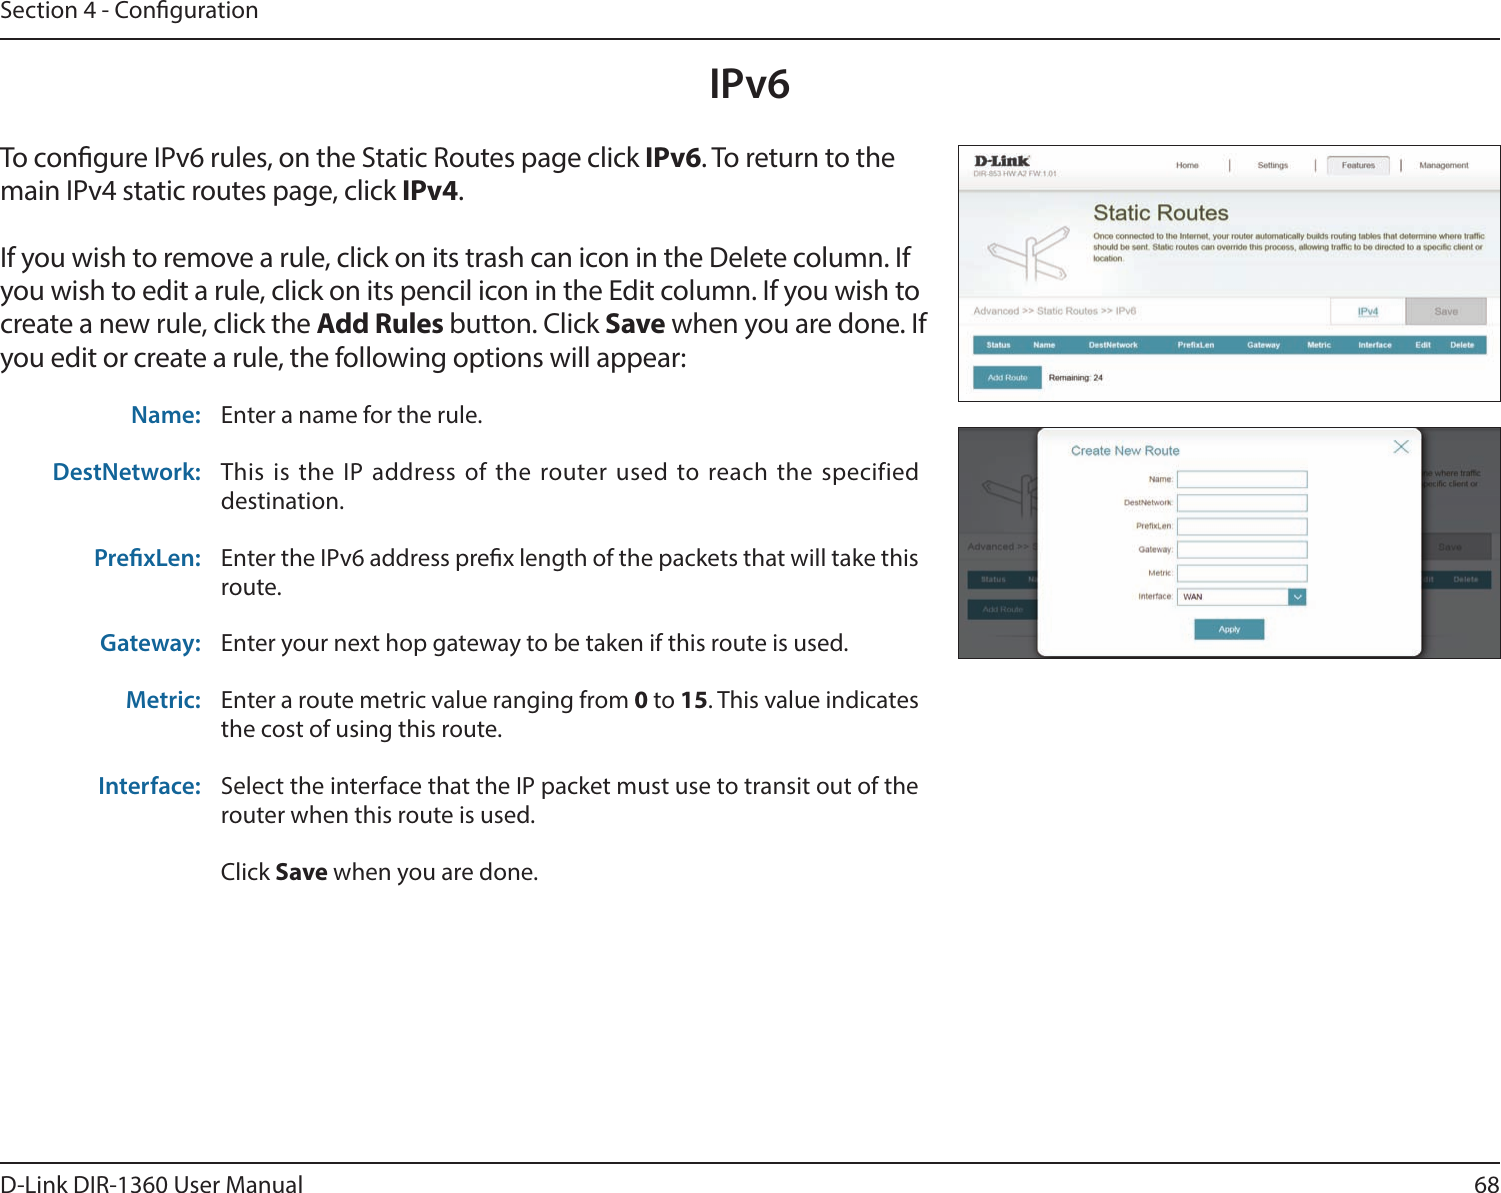 68D-Link DIR-1360 User ManualSection 4 - CongurationIPv6To congure IPv6 rules, on the Static Routes page click IPv6. To return to the main IPv4 static routes page, click IPv4.If you wish to remove a rule, click on its trash can icon in the Delete column. If you wish to edit a rule, click on its pencil icon in the Edit column. If you wish to create a new rule, click the Add Rules button. Click Save when you are done. If you edit or create a rule, the following options will appear:Name: Enter a name for the rule.DestNetwork: This is the IP address of the router used to reach the specified destination.PrexLen: Enter the IPv6 address prex length of the packets that will take this route. Gateway: Enter your next hop gateway to be taken if this route is used.Metric: Enter a route metric value ranging from 0 to 15. This value indicates the cost of using this route. Interface: Select the interface that the IP packet must use to transit out of the router when this route is used.Click Save when you are done.